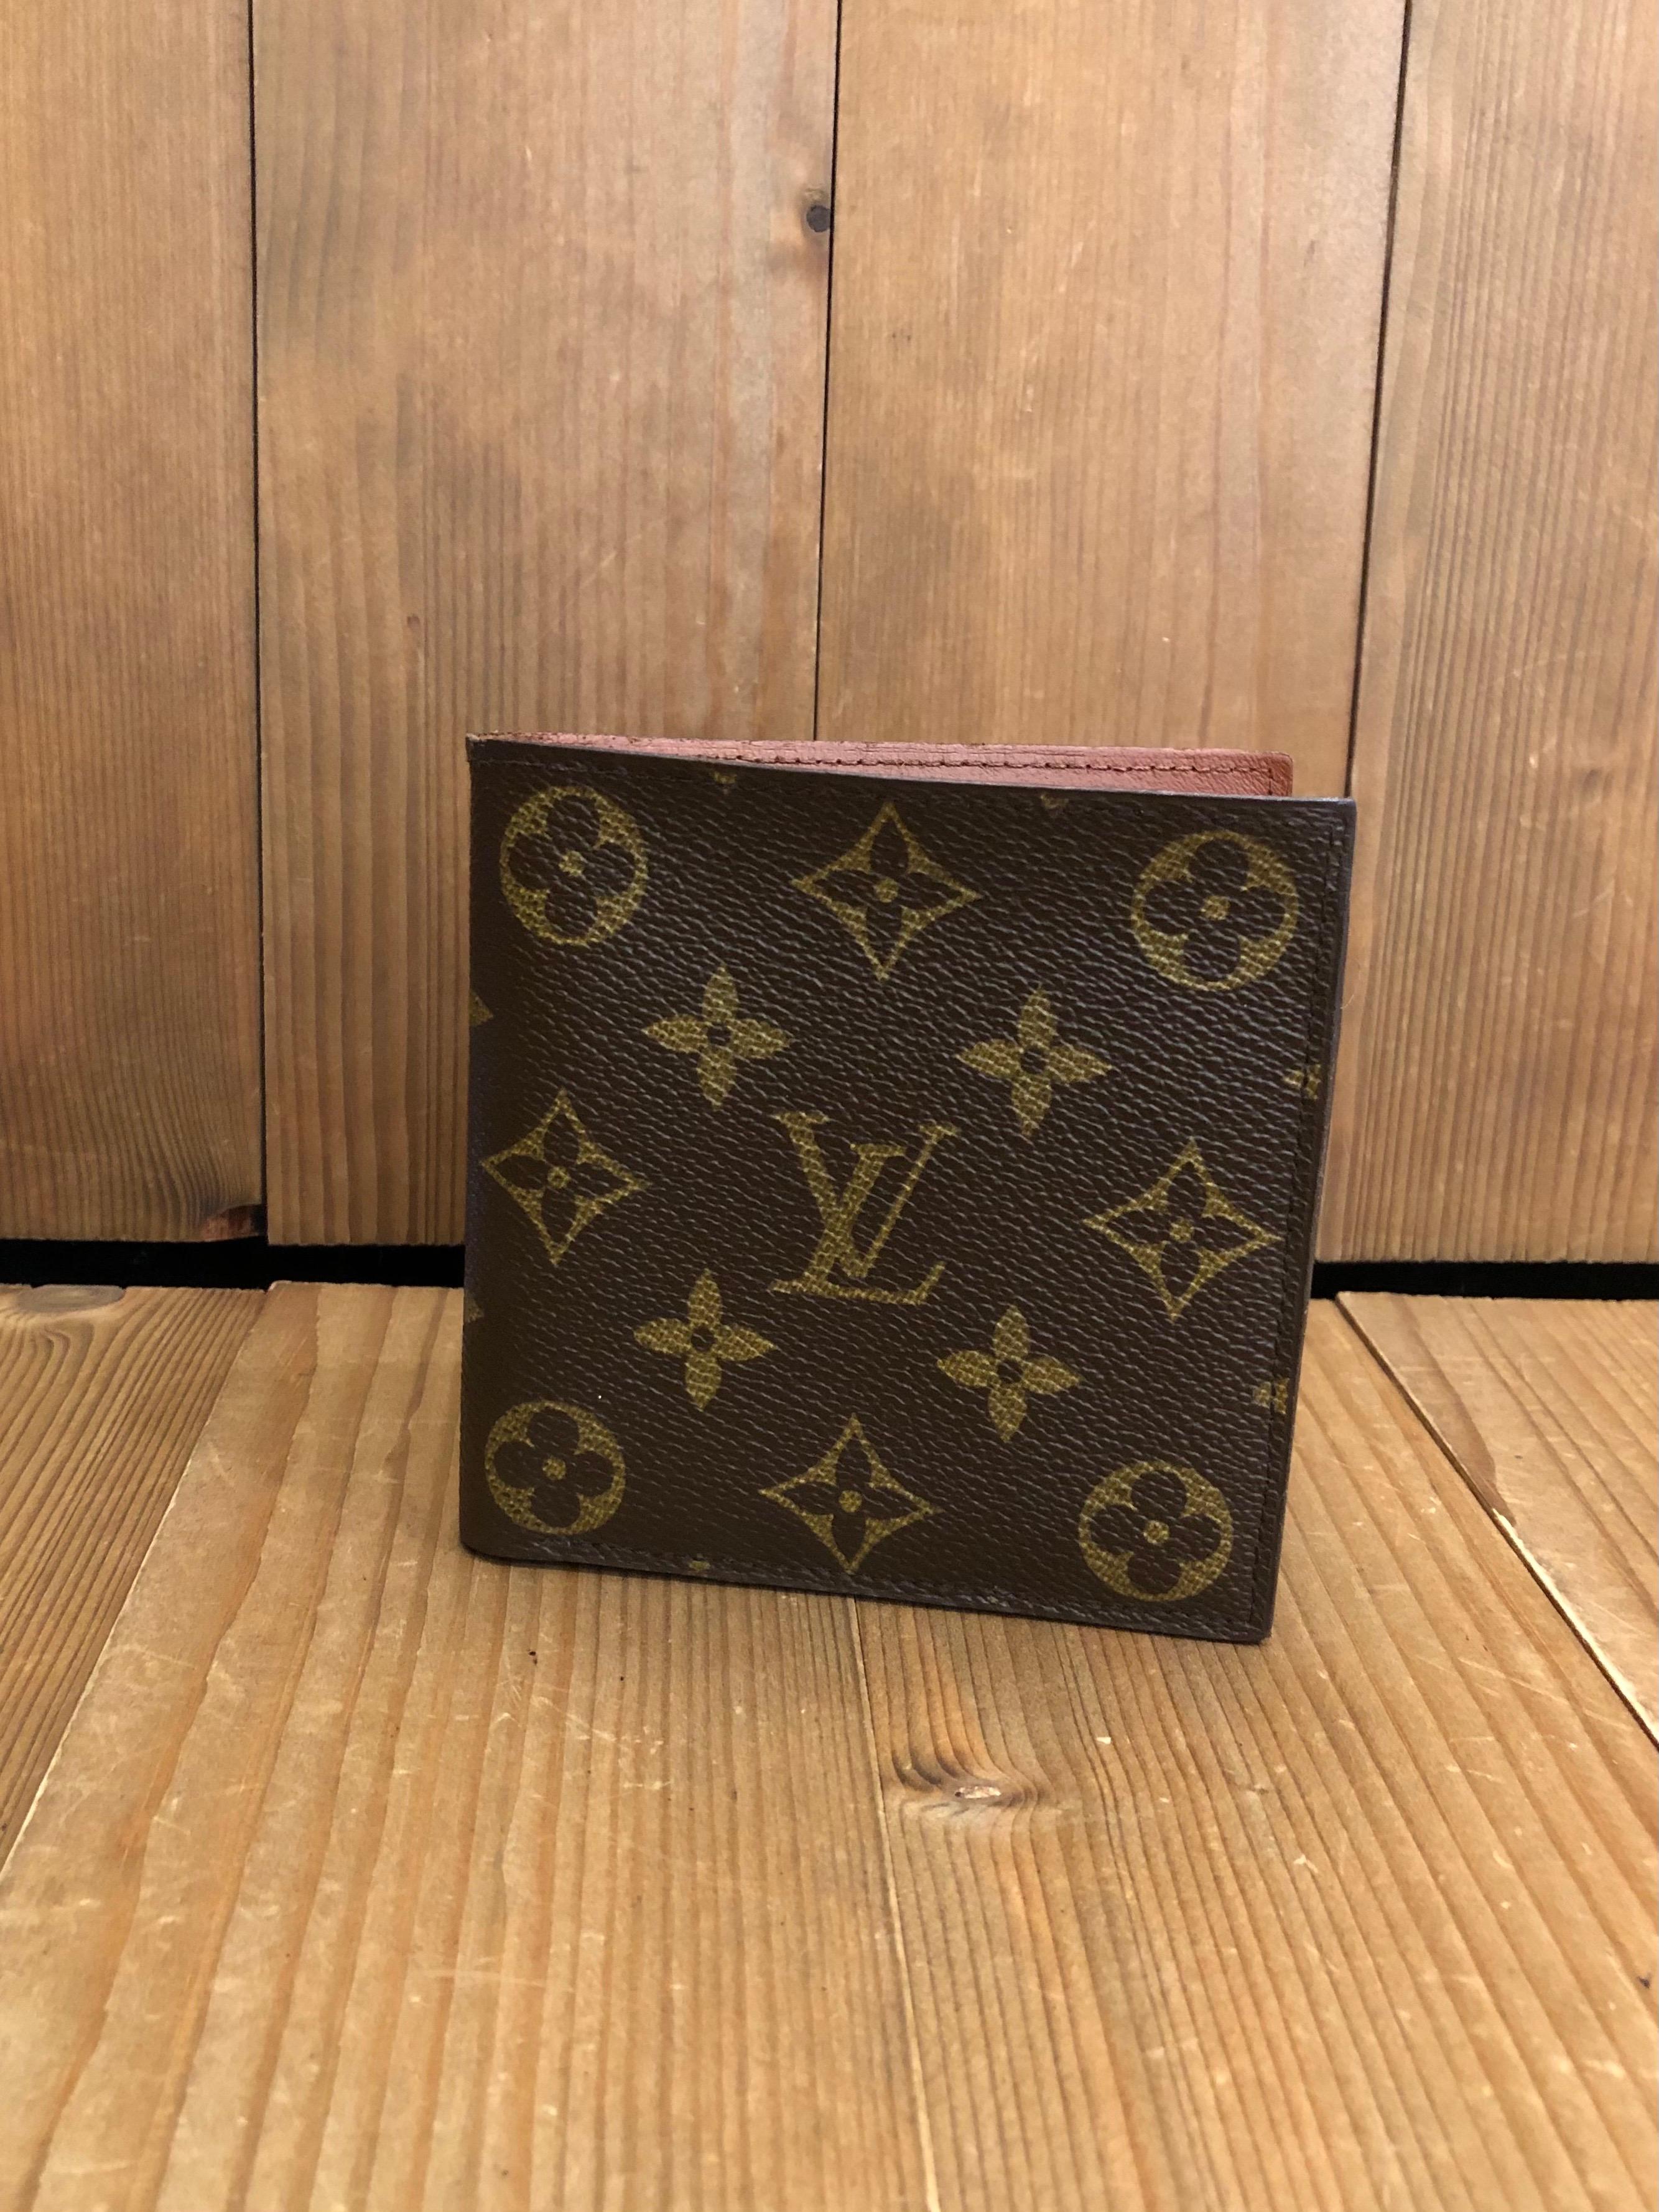 Rare 1970s Louis Vuitton bifold wallet with monogram canvas interior. It features two bill pockets one open pocket and one coin pouch with snap closure. Measures 10 x 10 x 1 cm. Made in France. No date code (manufactured prior to 1982).

Condition -